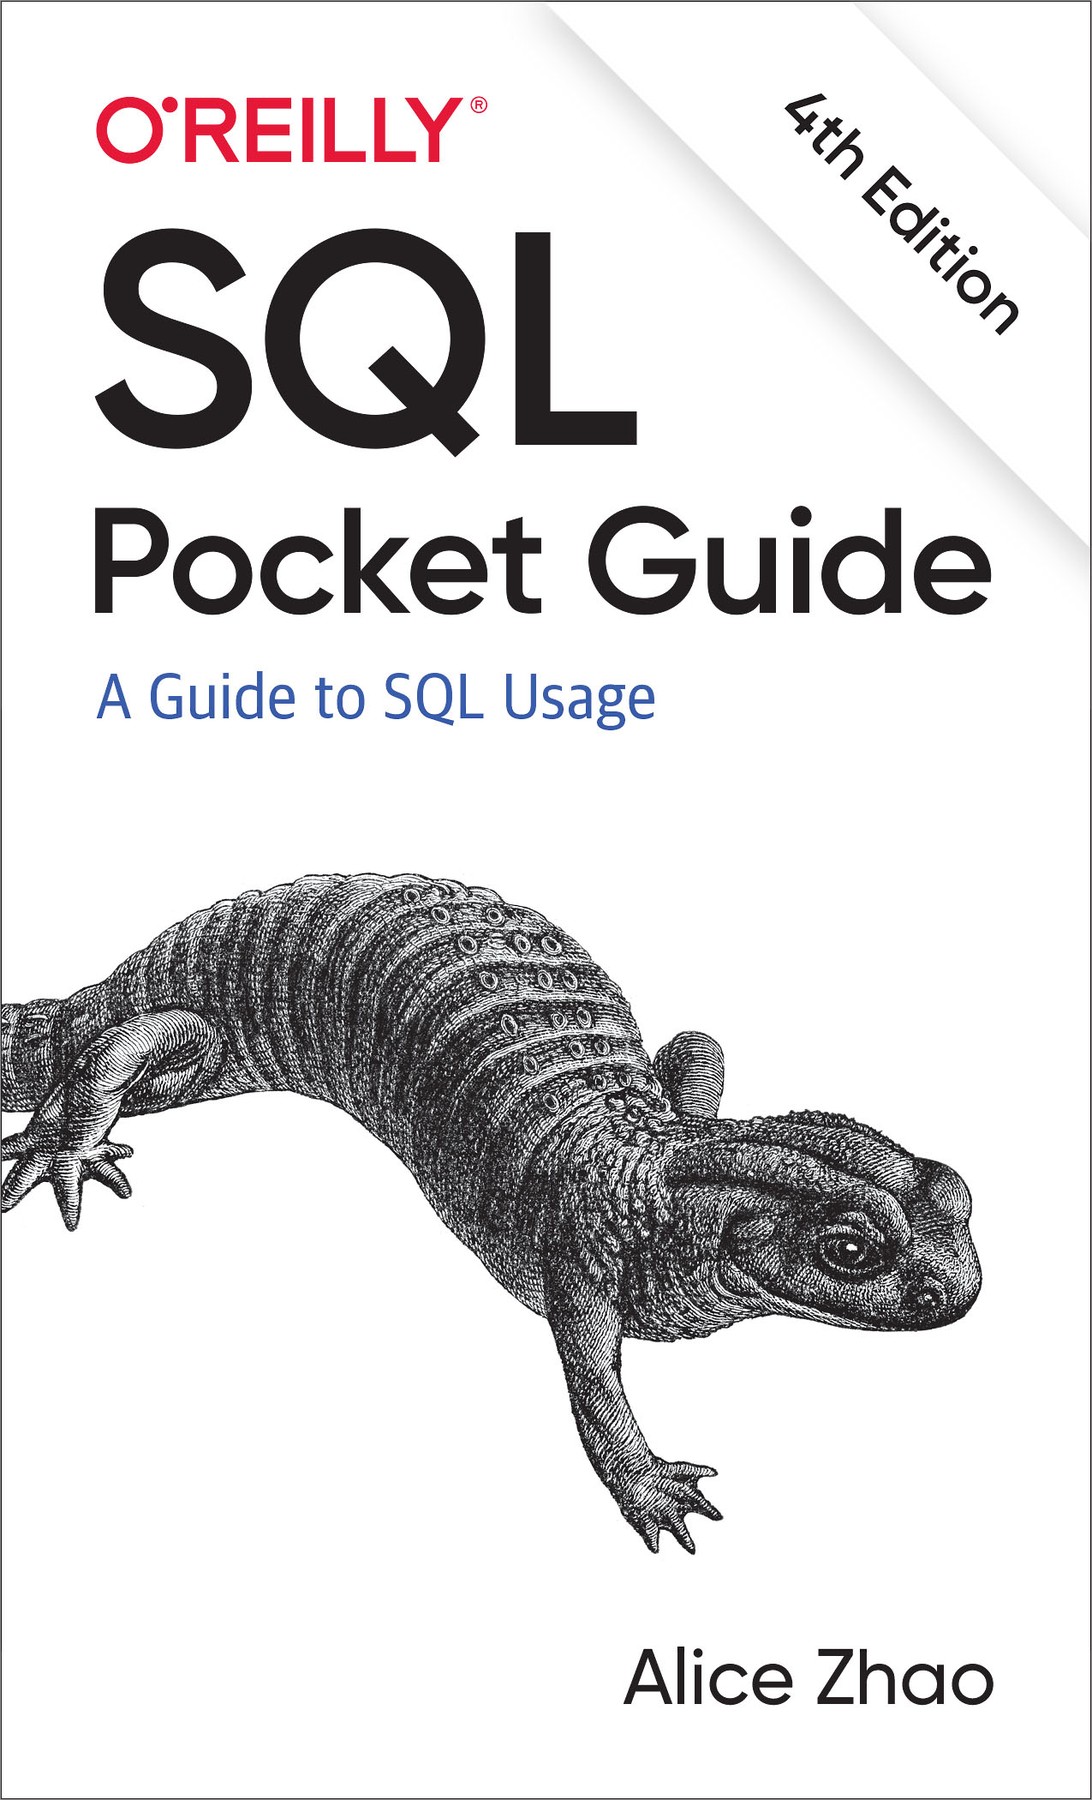 SQL Pocket Guide: A Guide to SQL Usage, 4th Edition